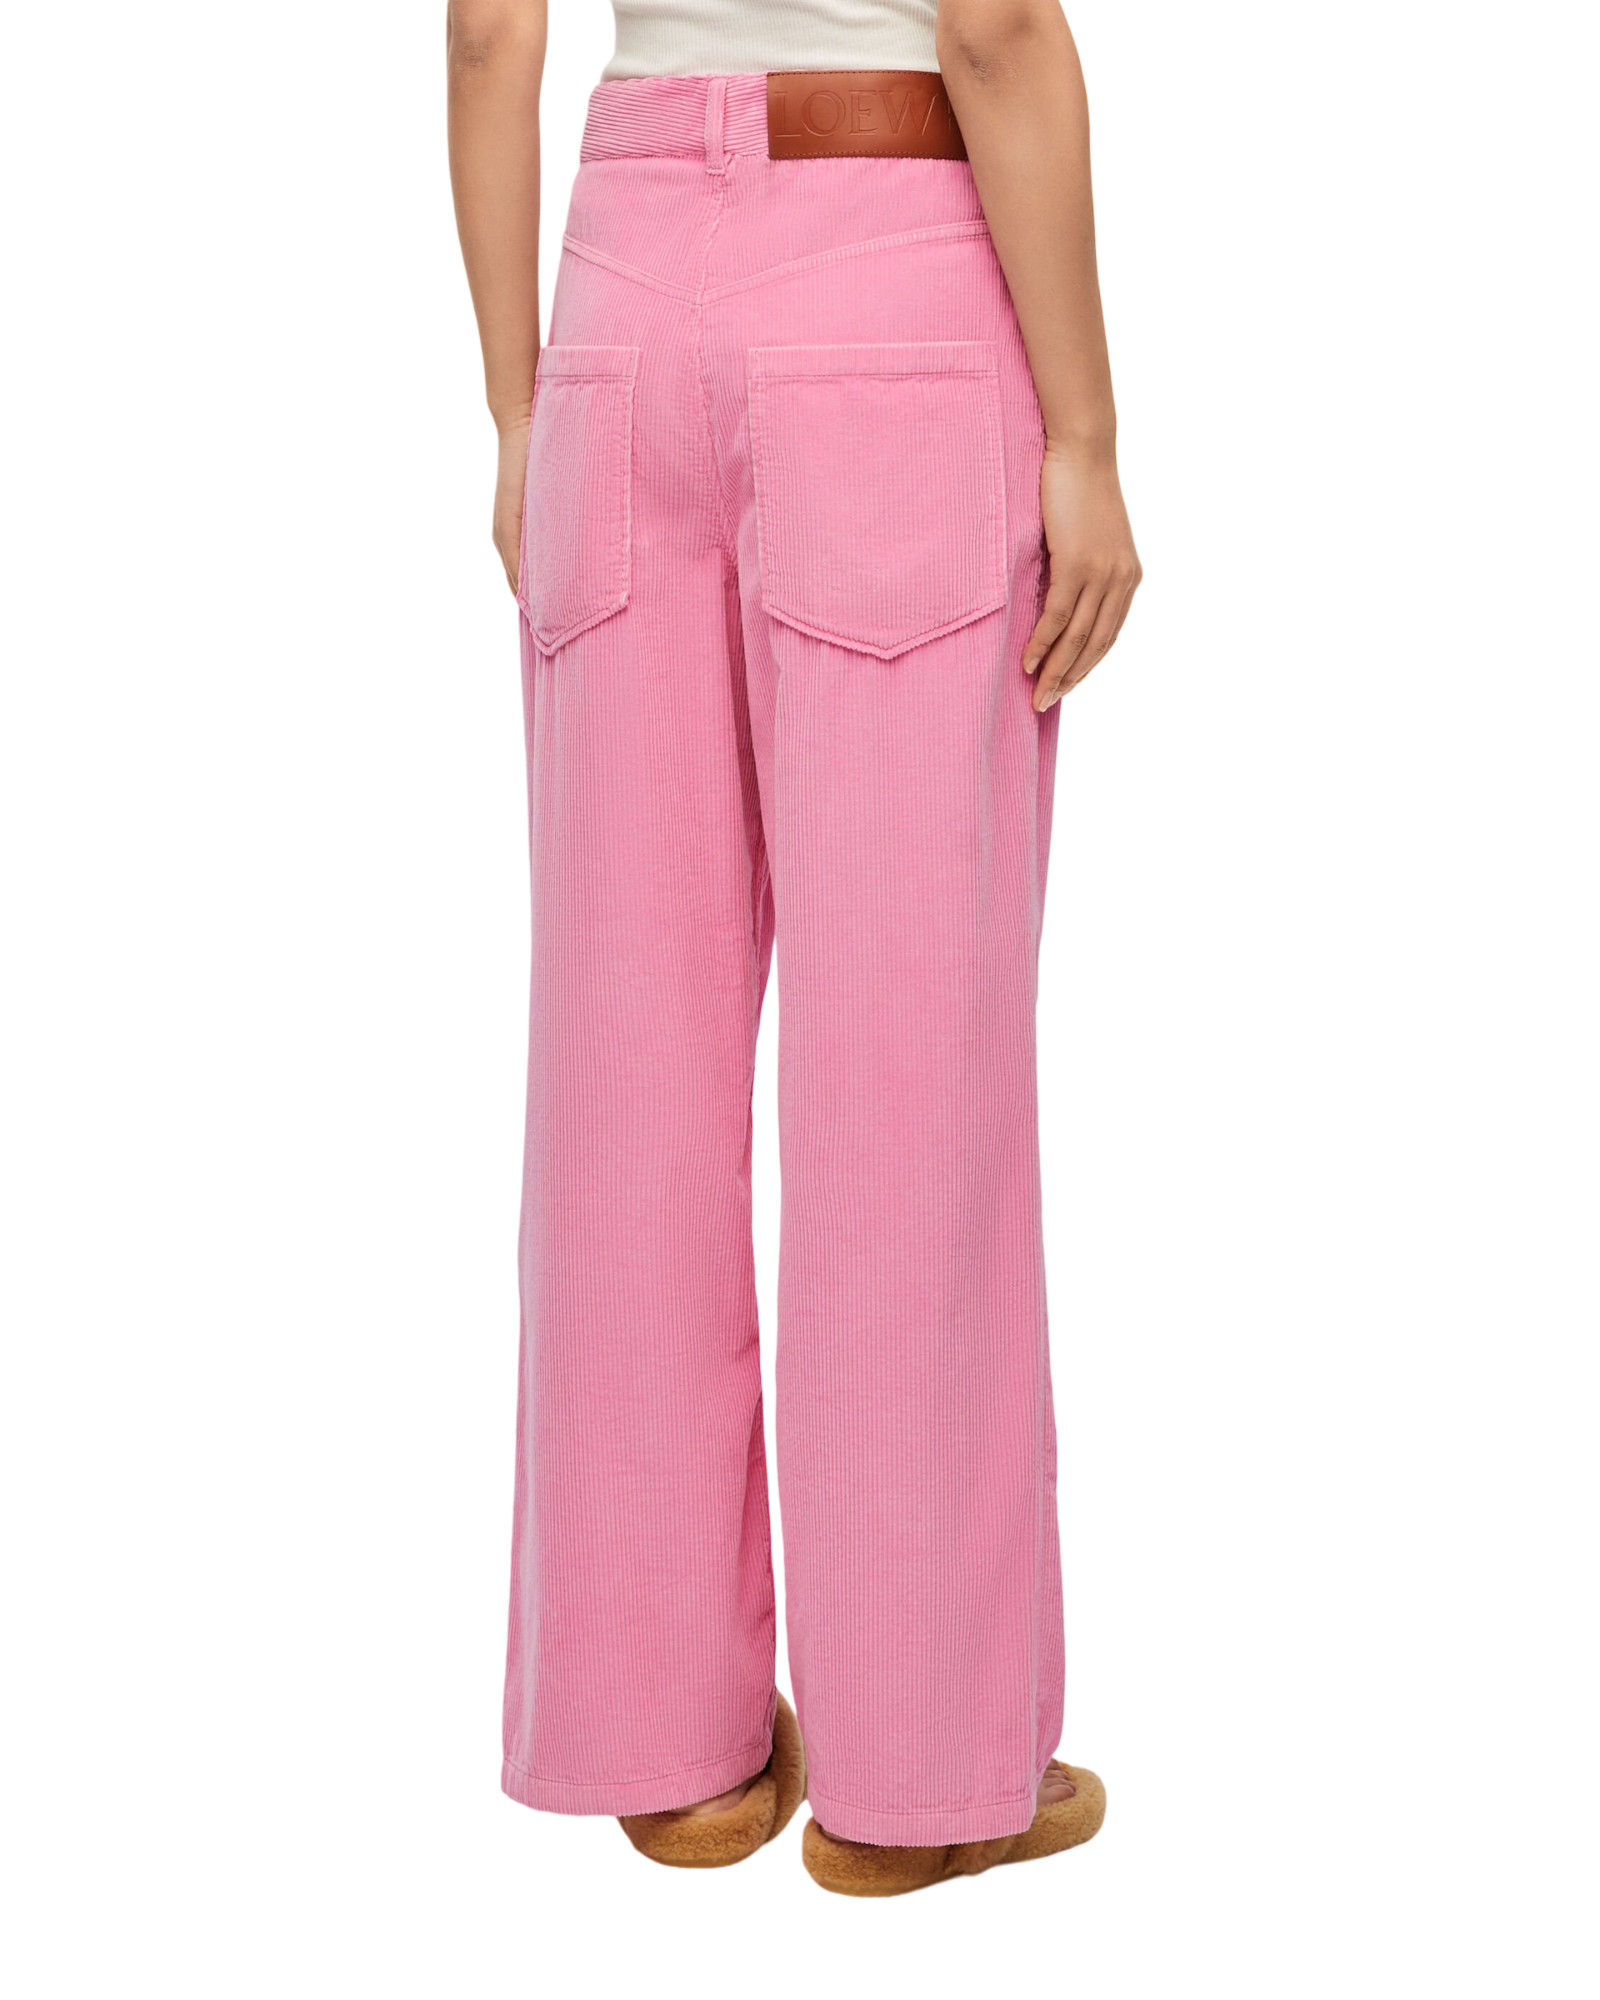 Loose-fitting cotton pants